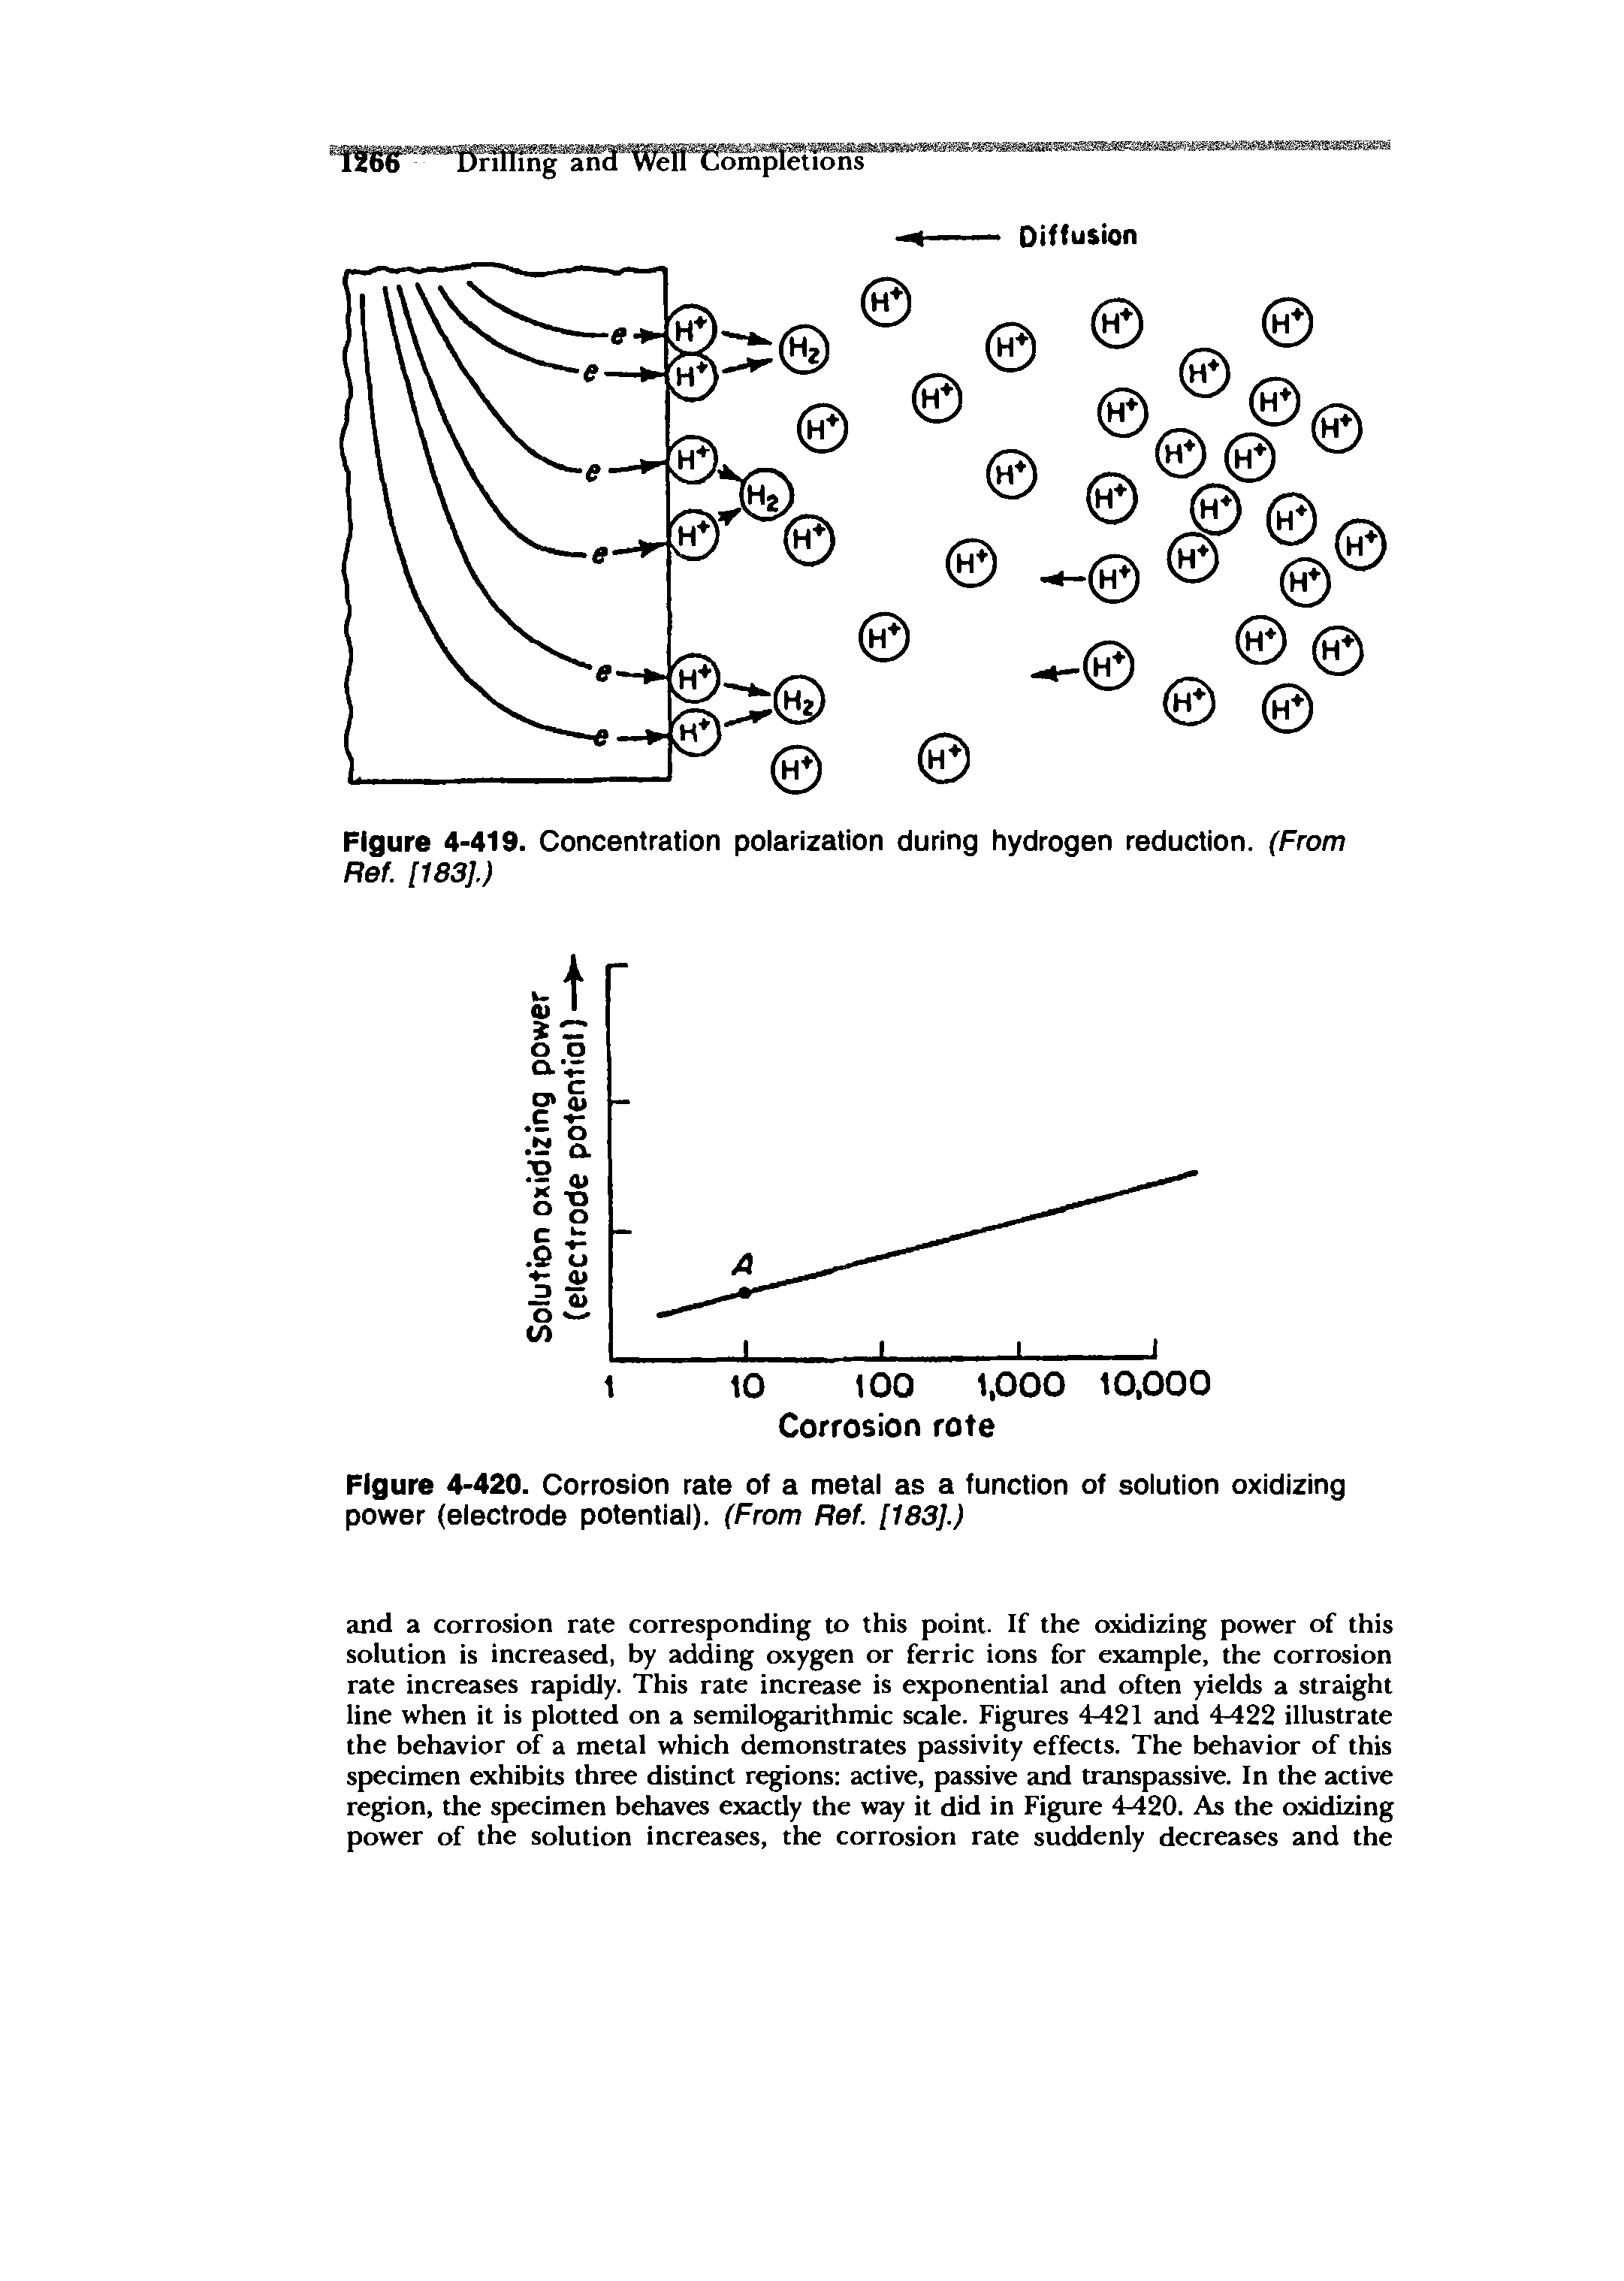 Figure 4-420. Corrosion rate of a metal as a function of soiution oxidizing power (electrode potential). (From Ref [183].)...